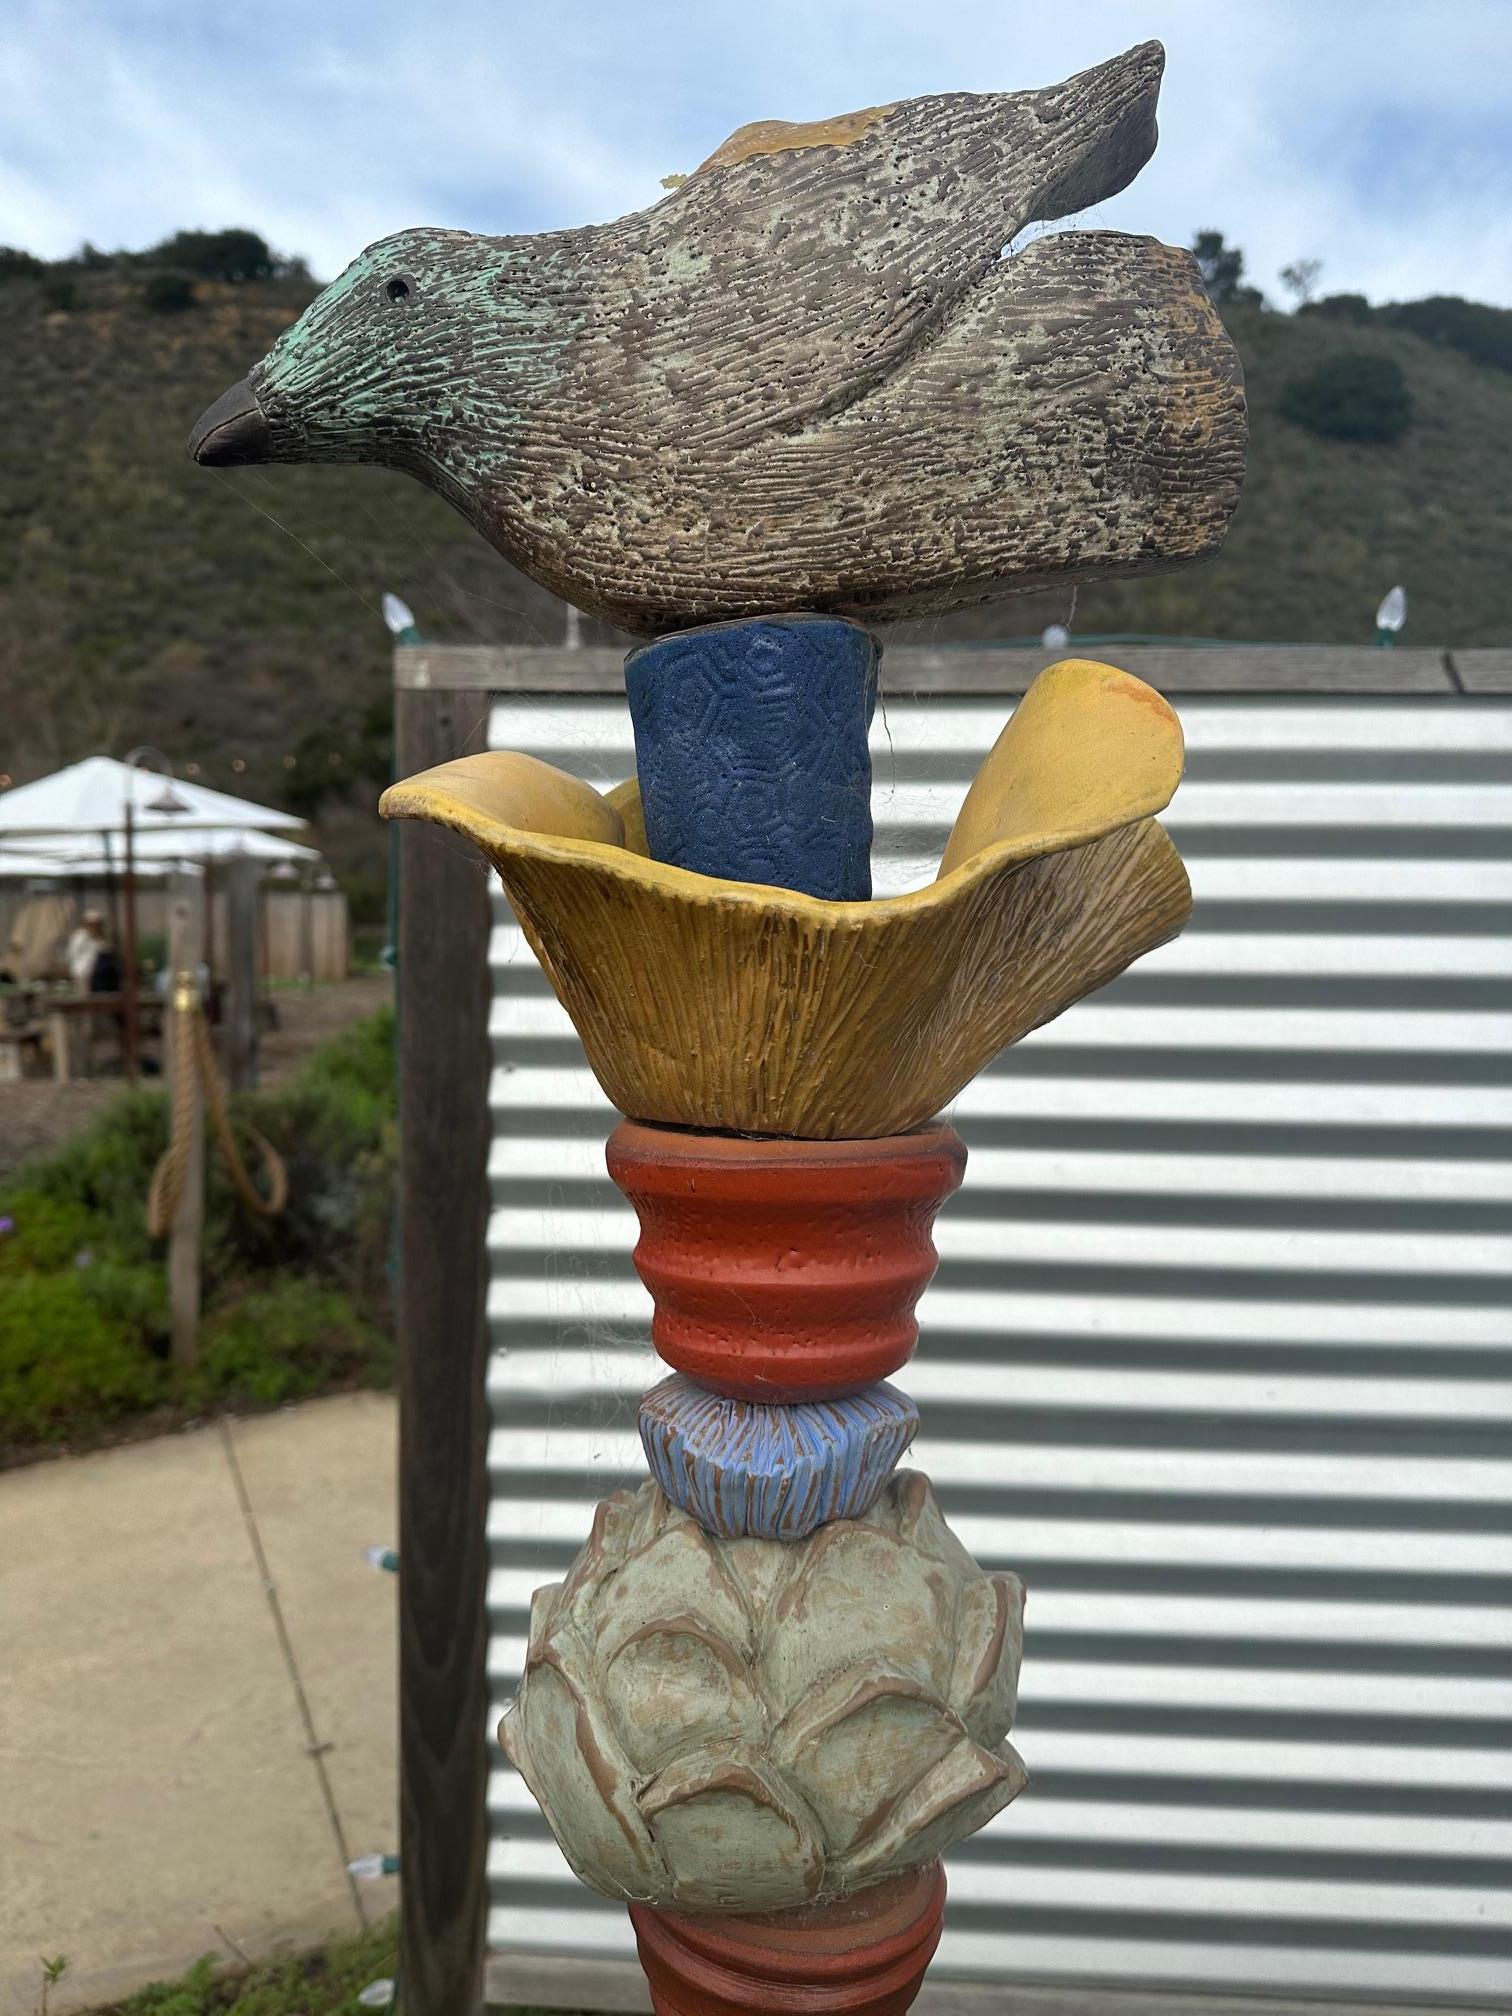 This Totem by Marc Zimmerman is currently on display at Earthbound Farm, nestled in California's Carmel Valley.

--
